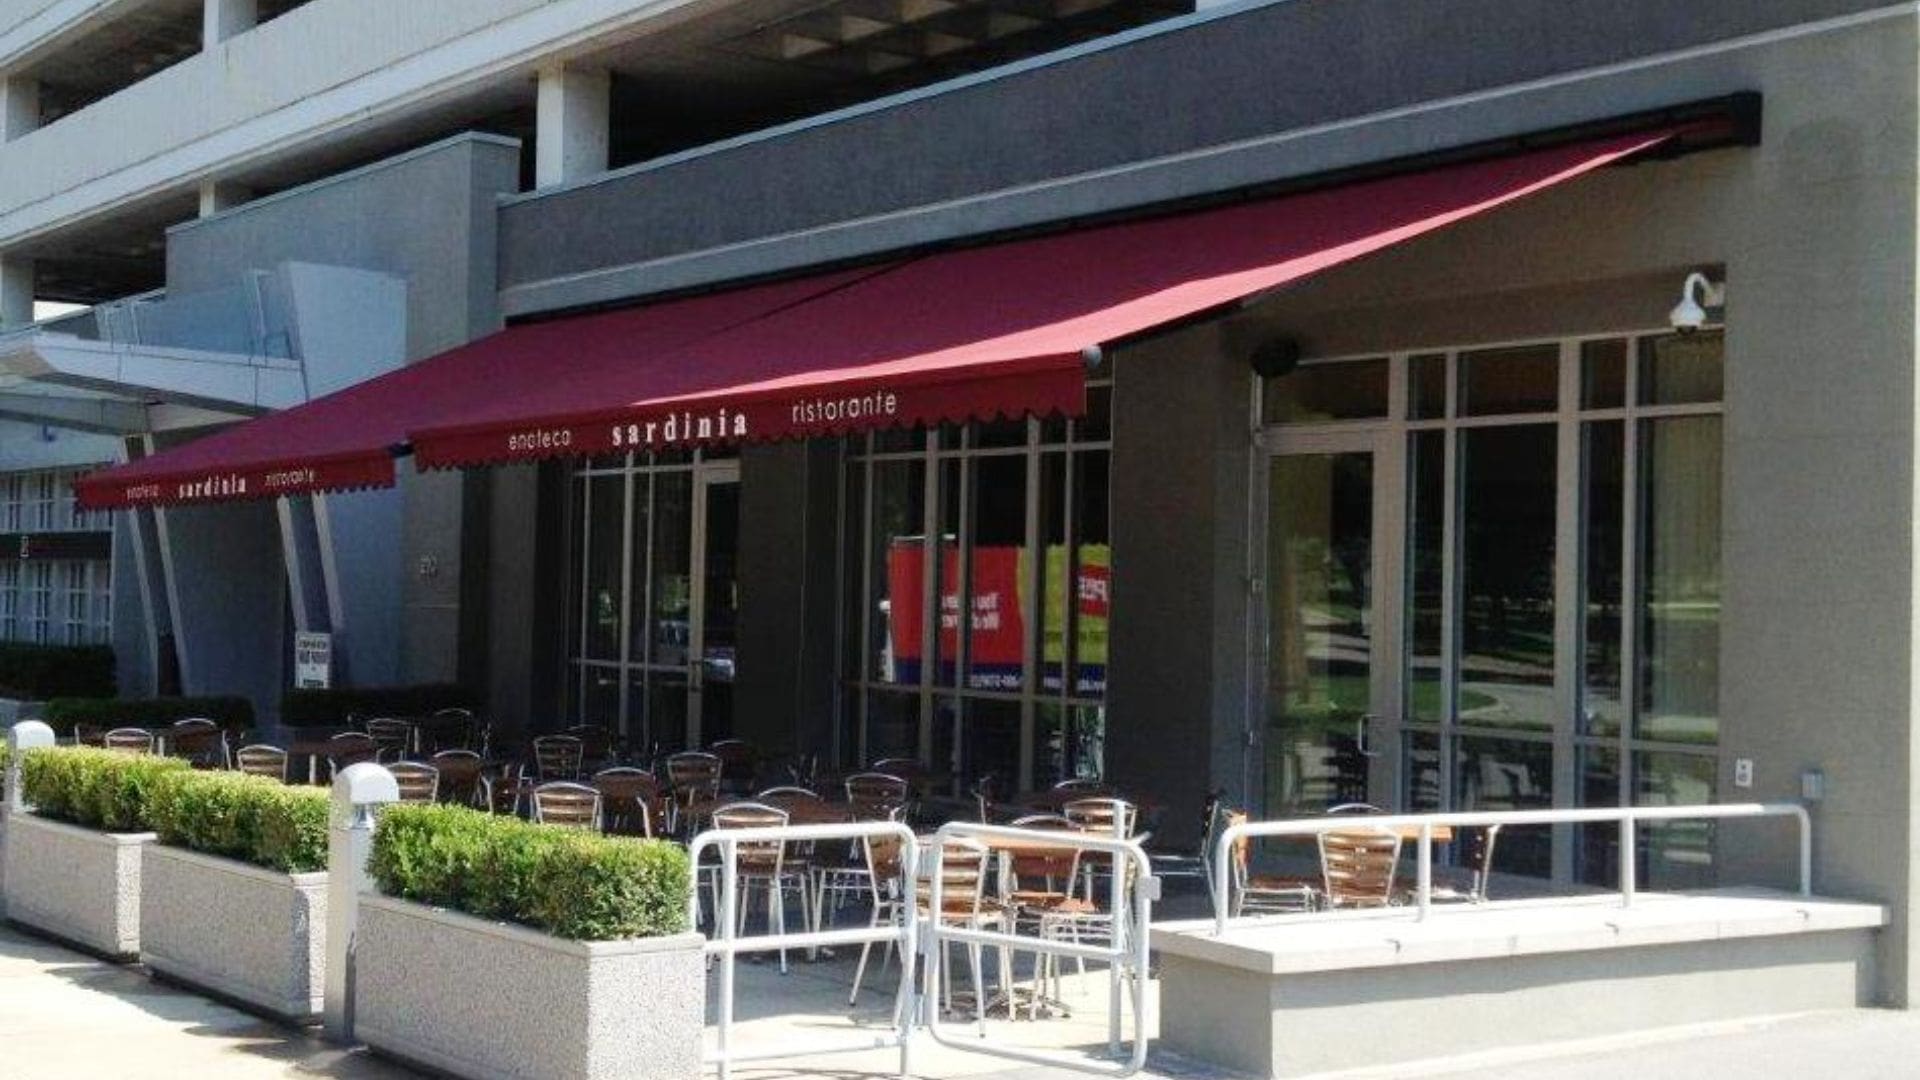 Do I Need a Permit to Install a Commercial Awning on My Business?